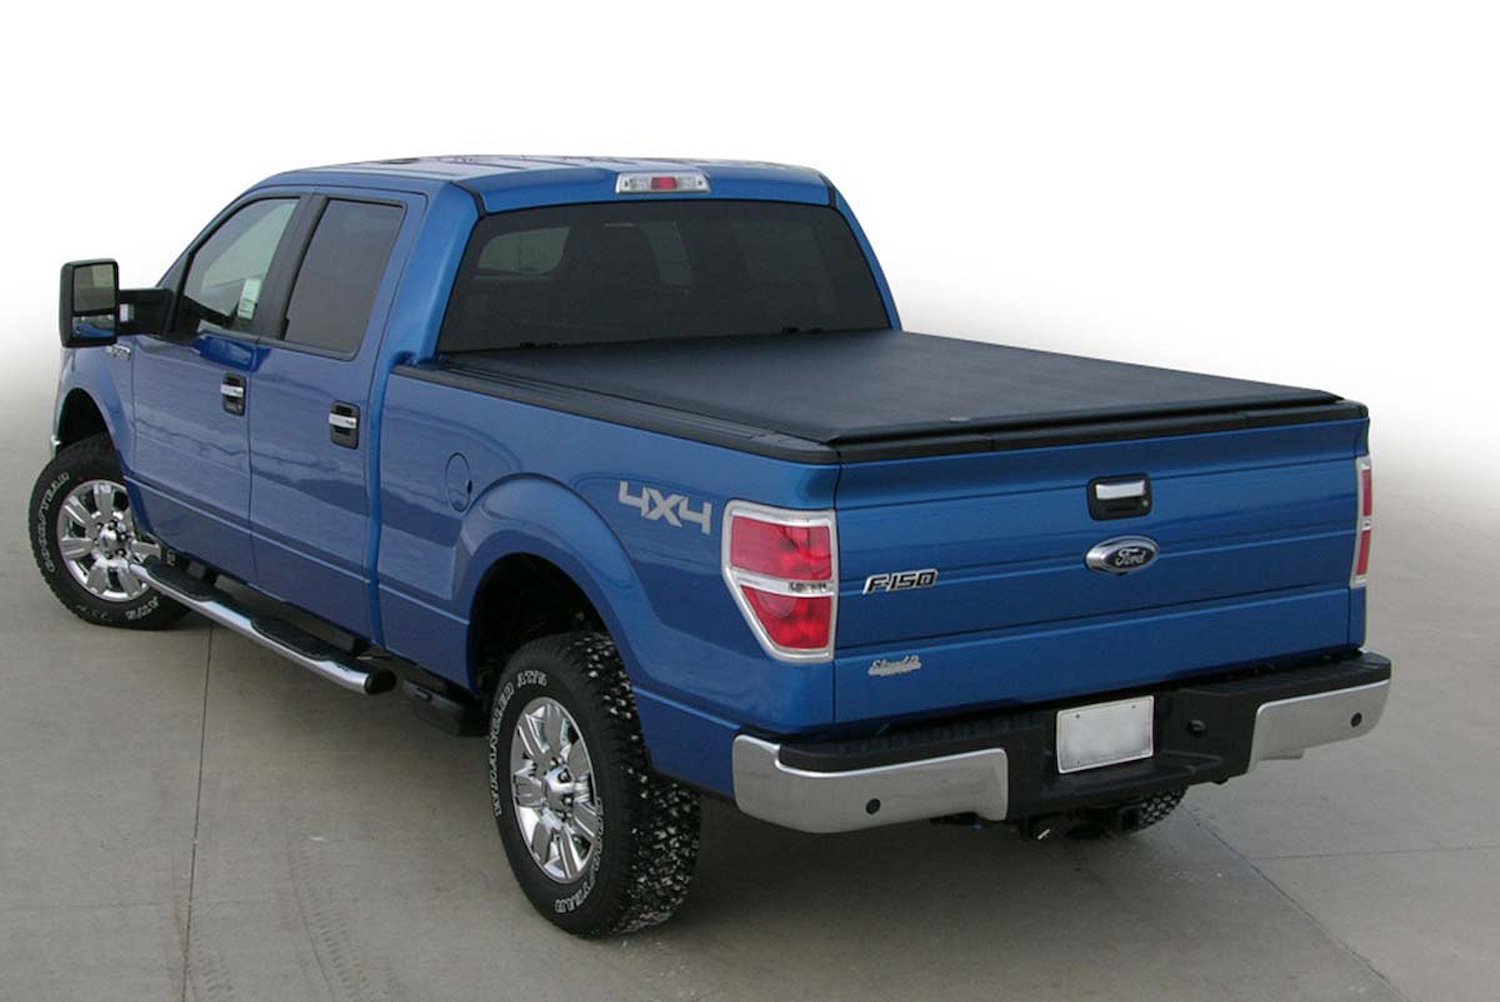 LORADO Roll-Up Tonneau Cover, 2017-2022 Ford F-250/F-350/F-450, with 8 ft. Bed